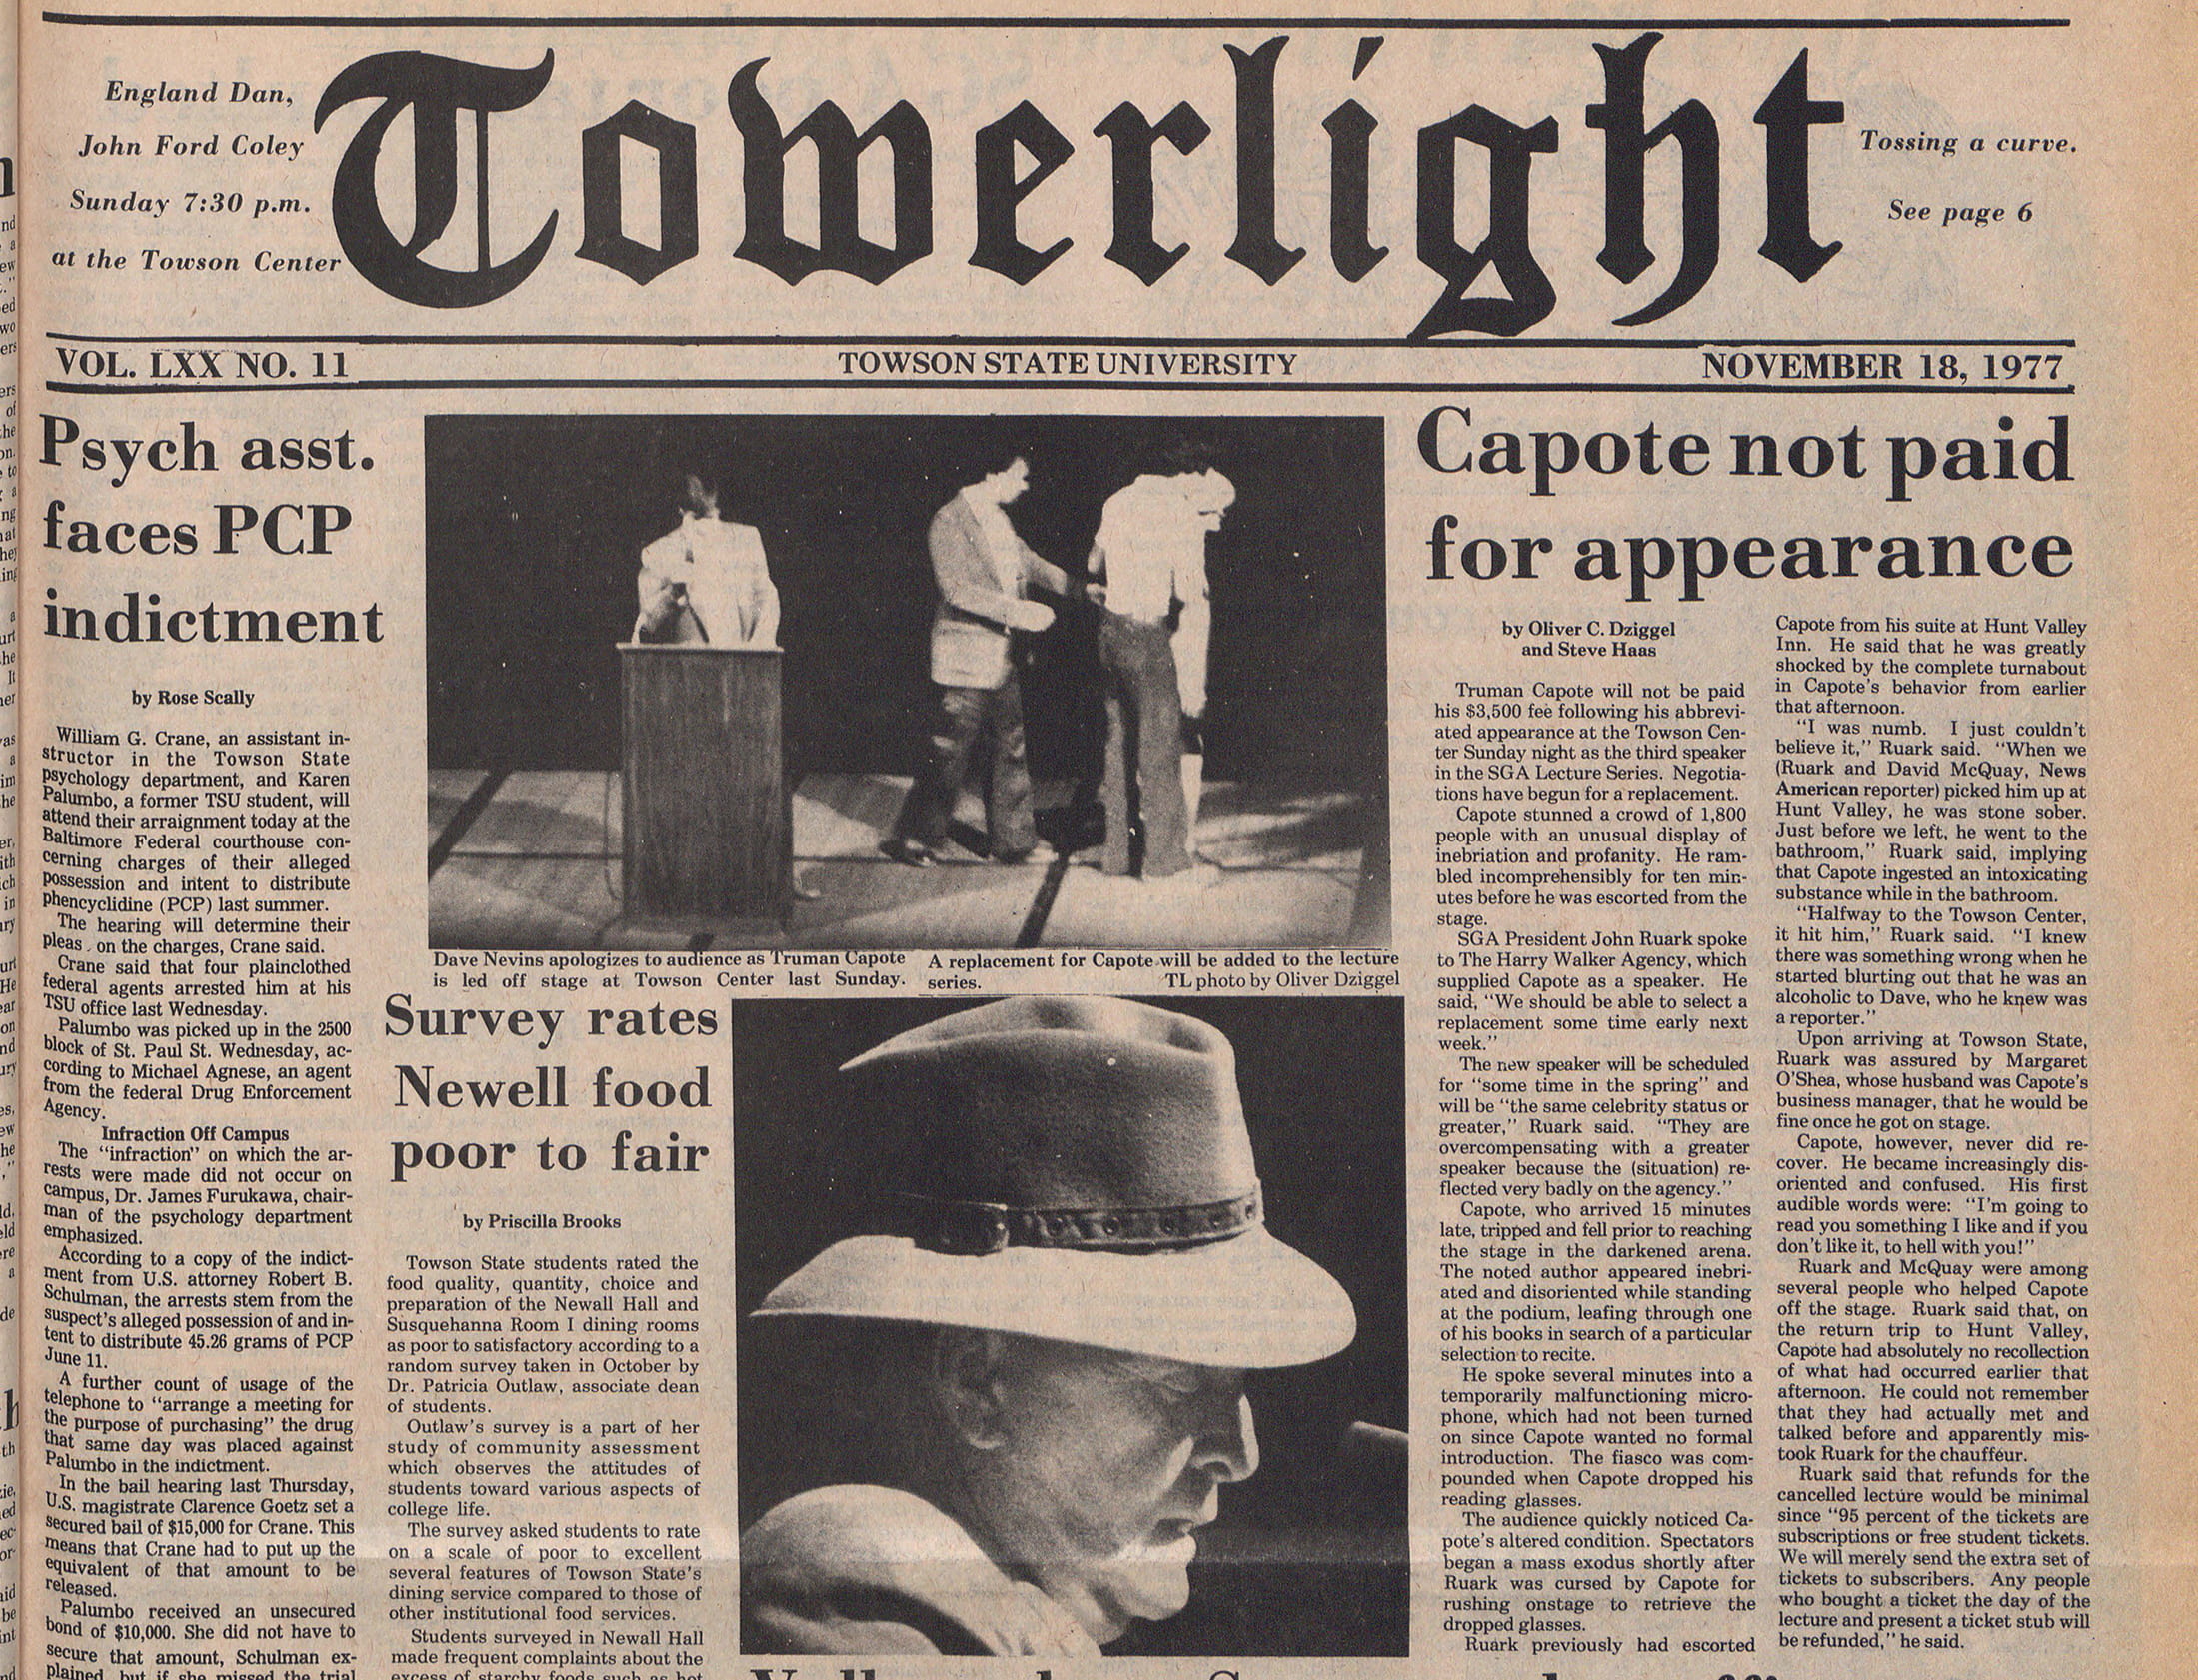 Front of newspaper with photos of Truman Capote being led off stage and reports that he was not paid for his appearance at TSU after arriving incoherent.